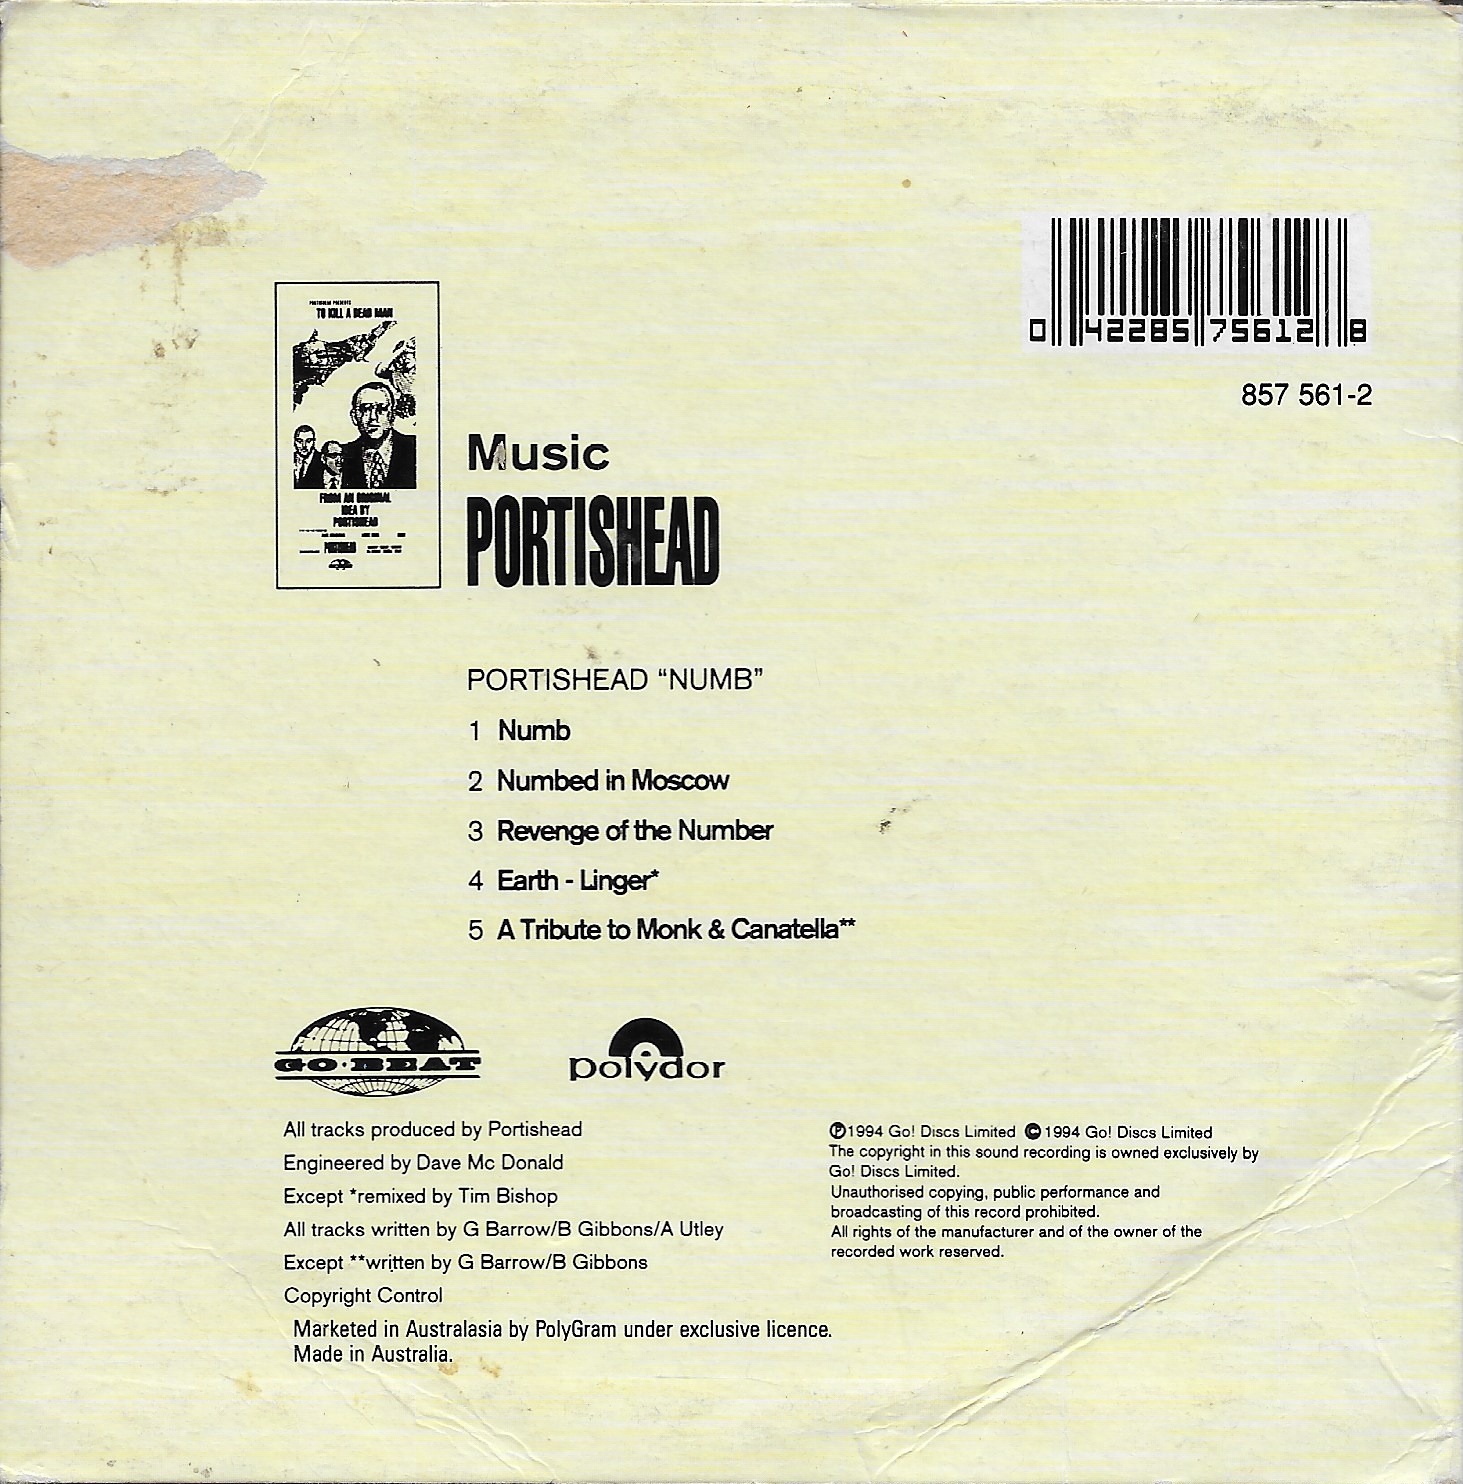 Picture of 857561 - 2 Numb by artist Portishead  